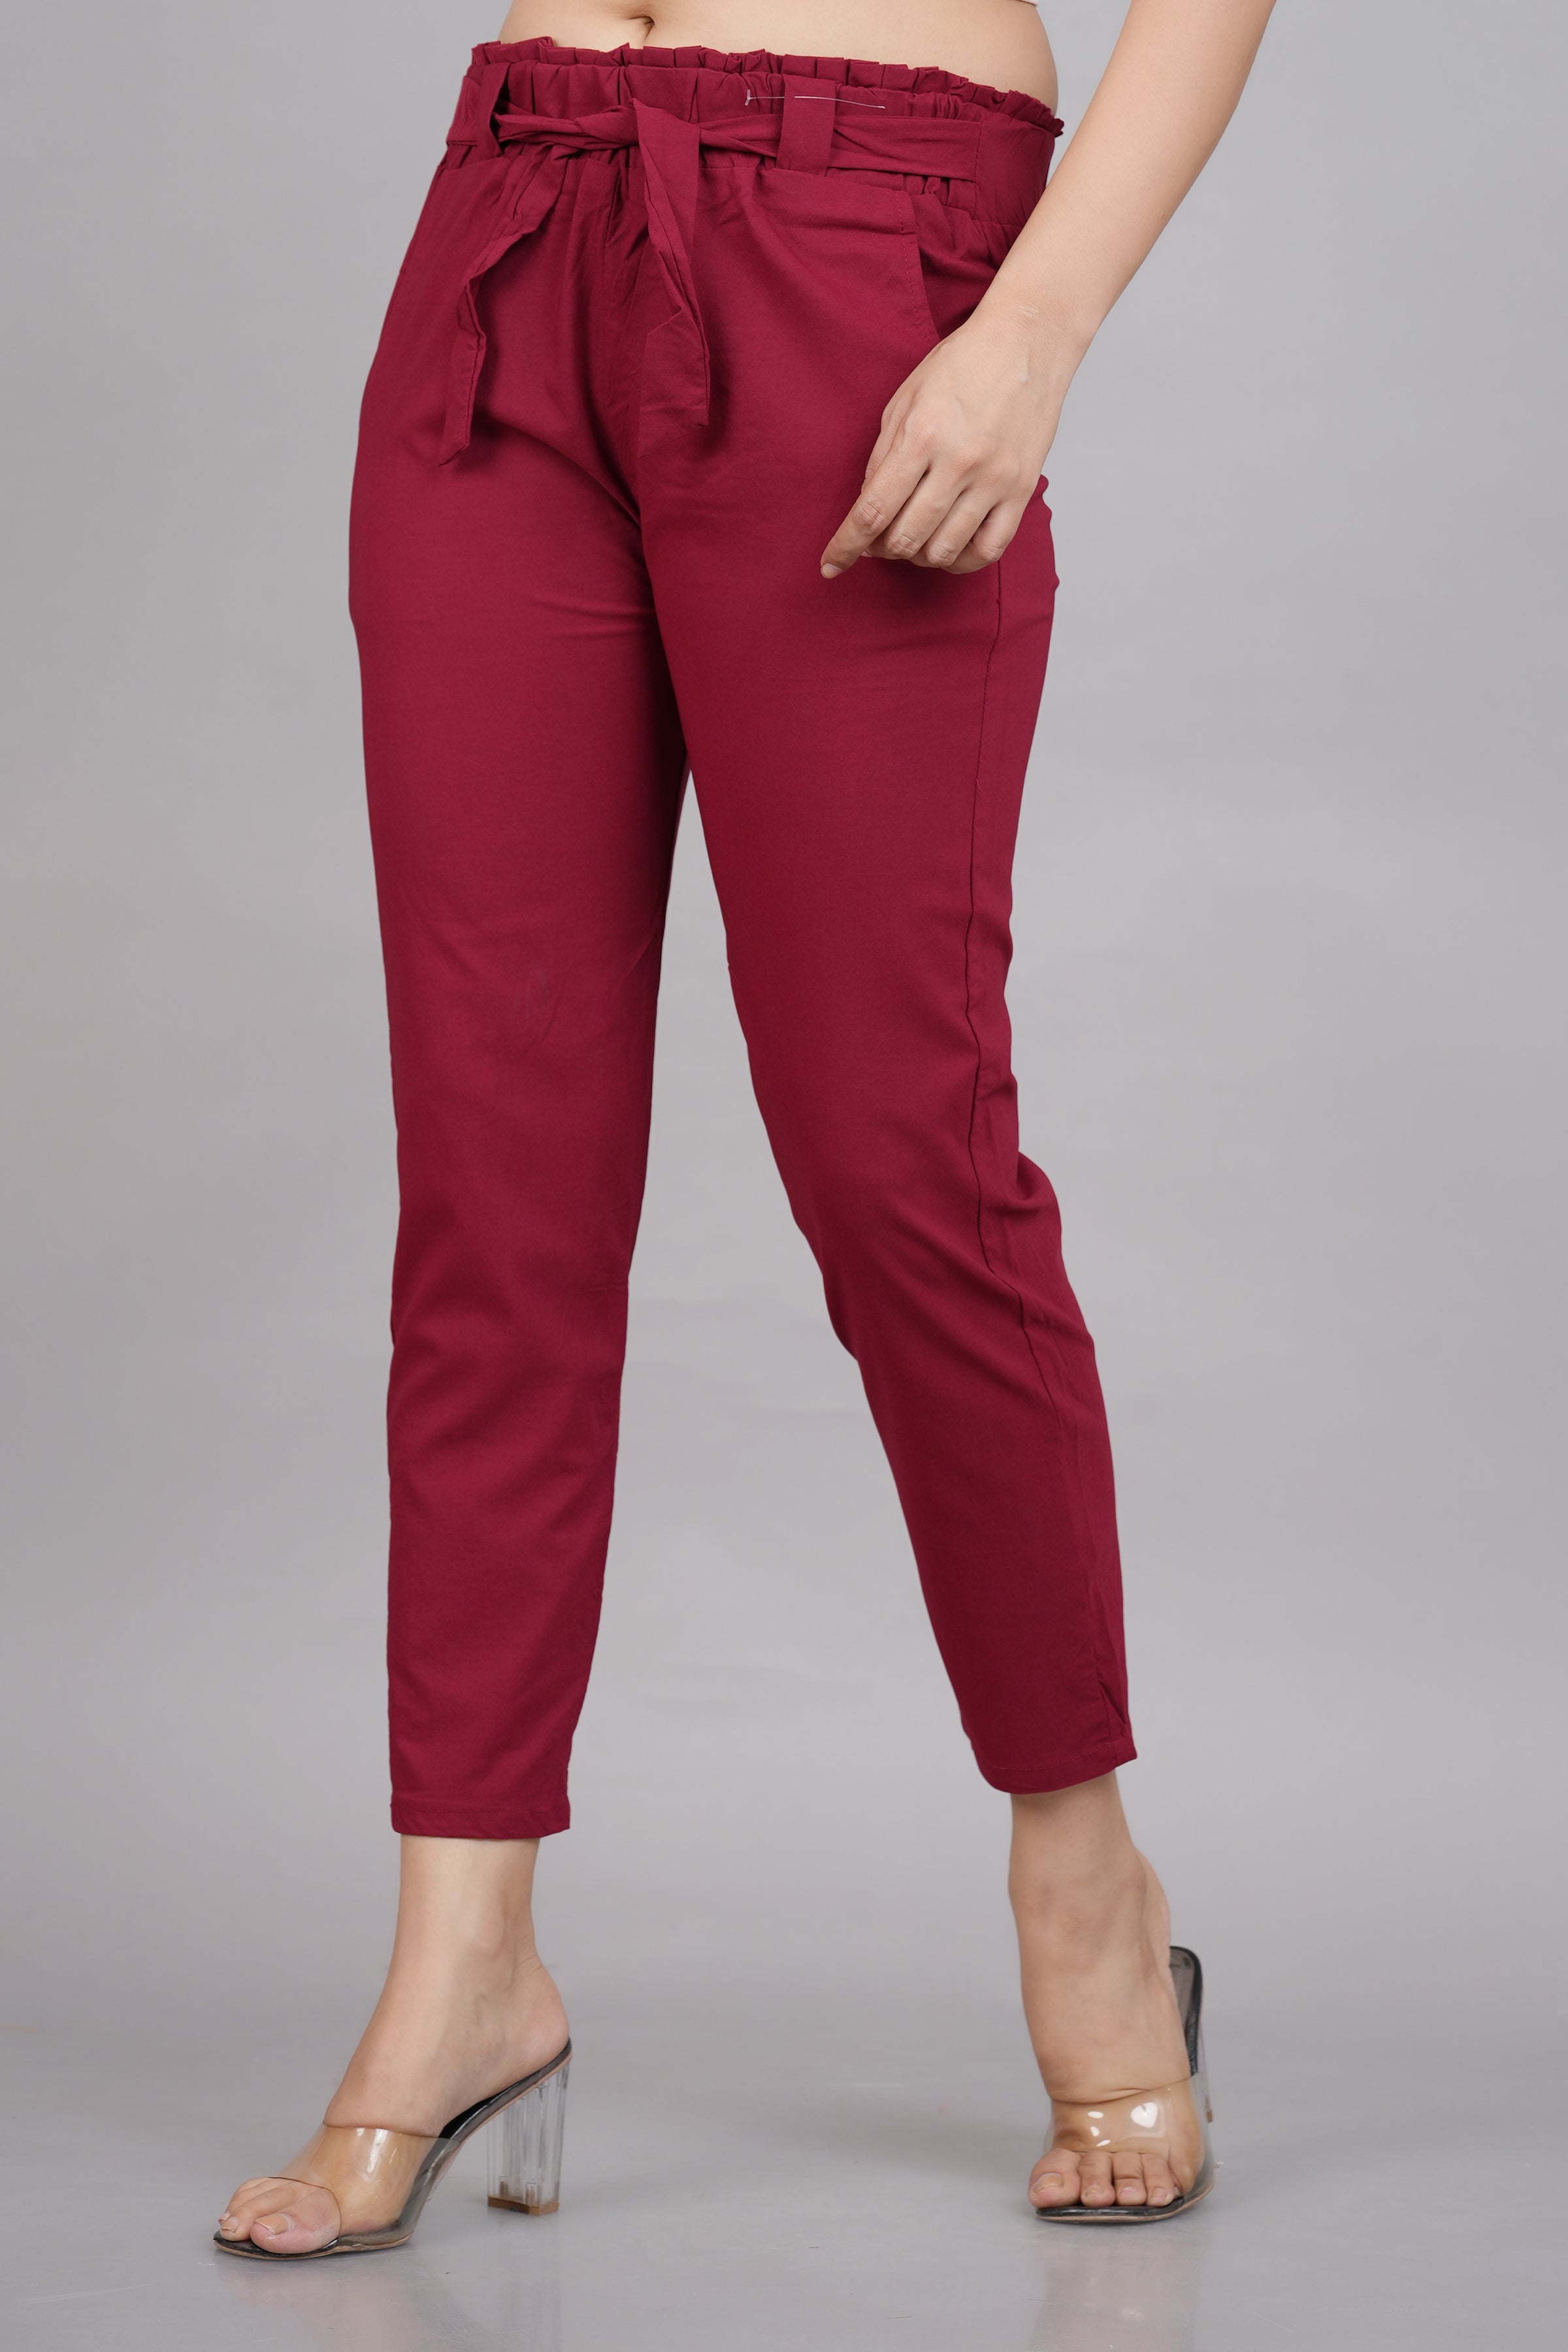 SHARKTRIBE Striped Women Maroon Track Pants - Buy SHARKTRIBE Striped Women  Maroon Track Pants Online at Best Prices in India | Flipkart.com